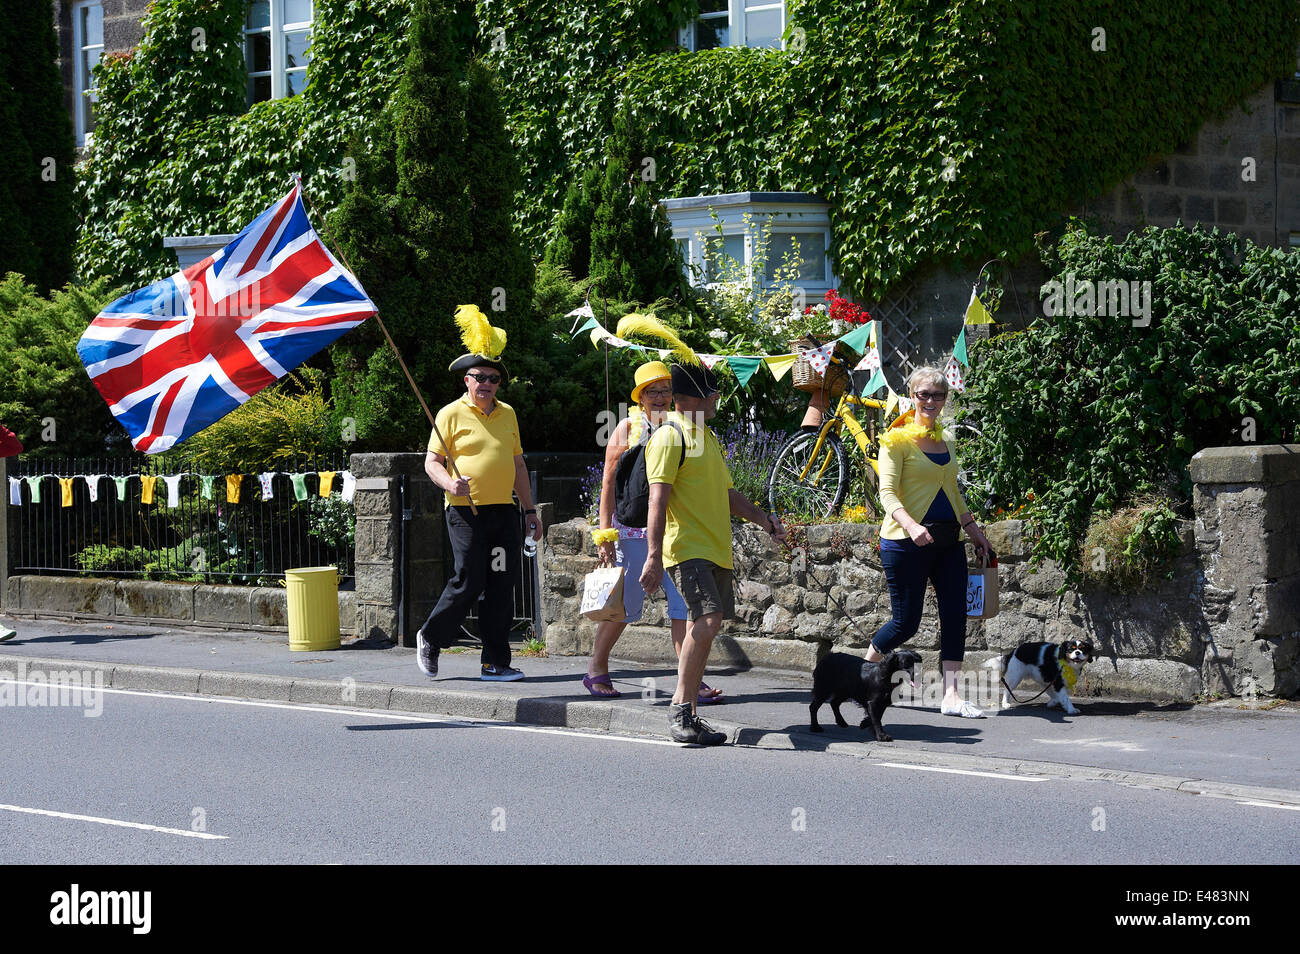 Killinghall Village, North Yorkshire, UK.  5th July 2014. Tour de France, Stage one. Residents in the village of Killinghall get ready for the Tour de France riders to come through on their way to the finish line, 4km away in Harrogate, UK. LeedsPRPhoto/Alamy Live News Stock Photo